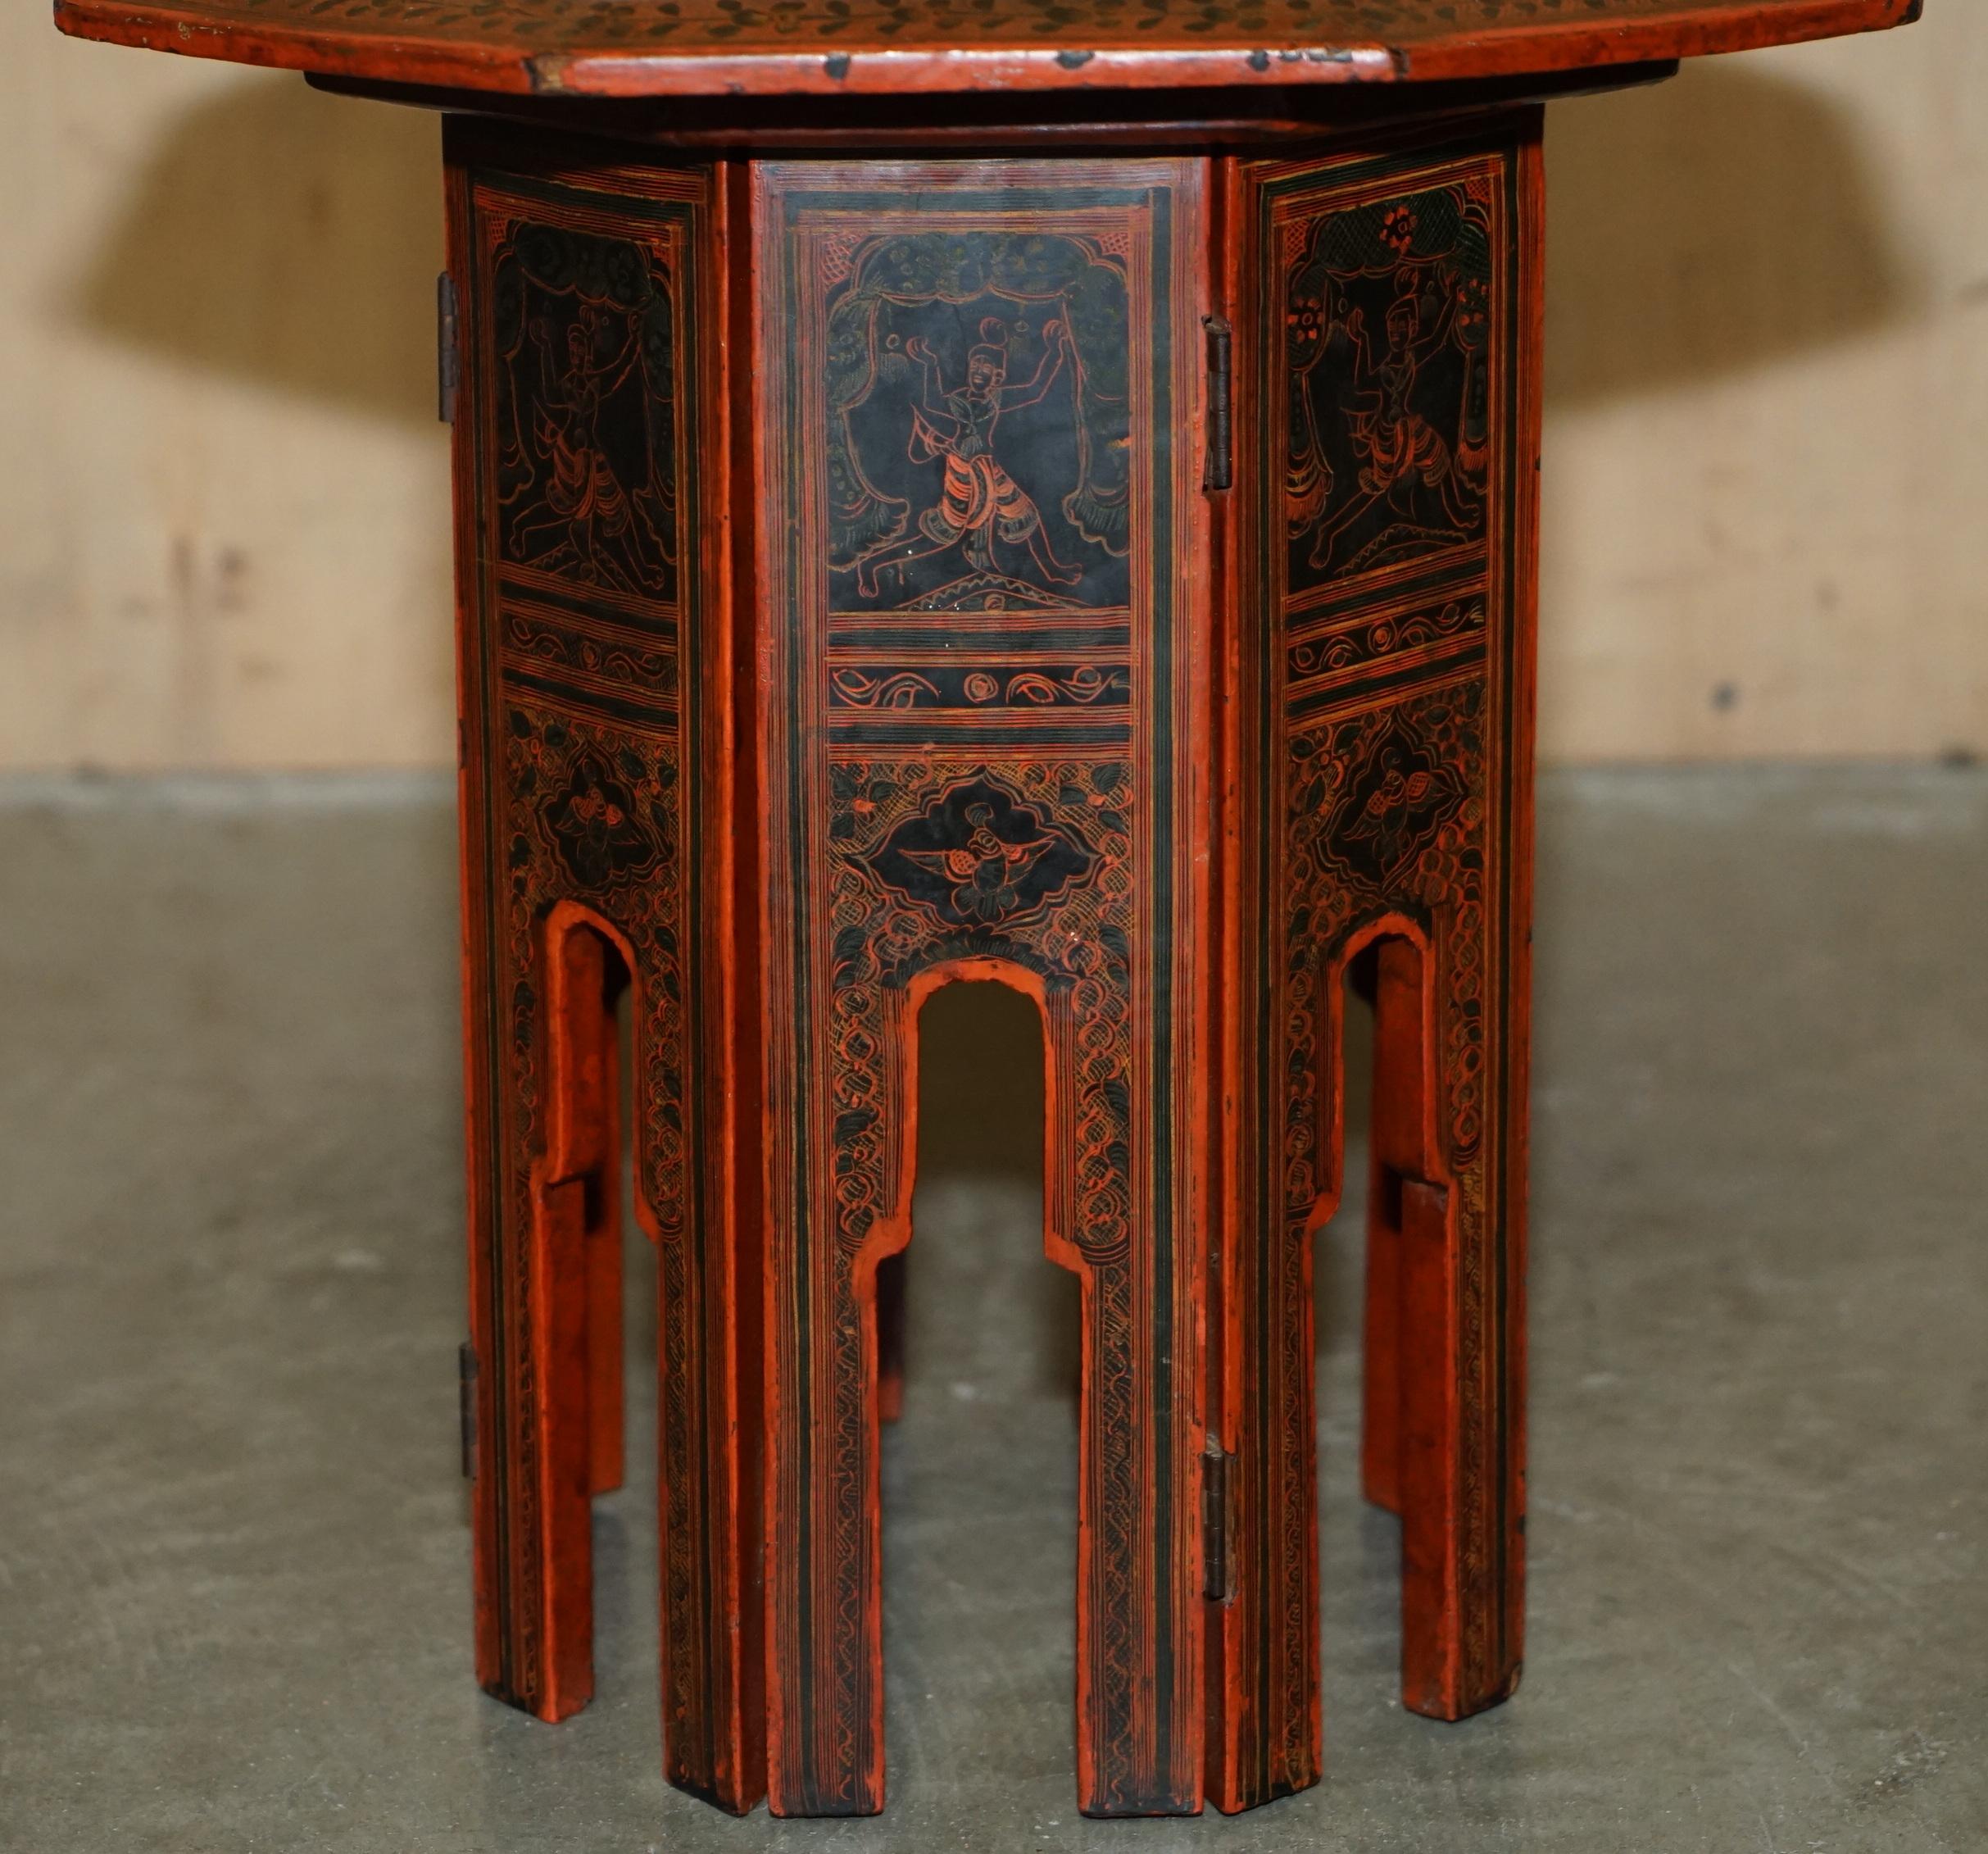 EXQUISITE ANTIQUE CiRCA 1900-1920 BURMESE HAND LACQUERED & PAINTED SIDE TABLE For Sale 1